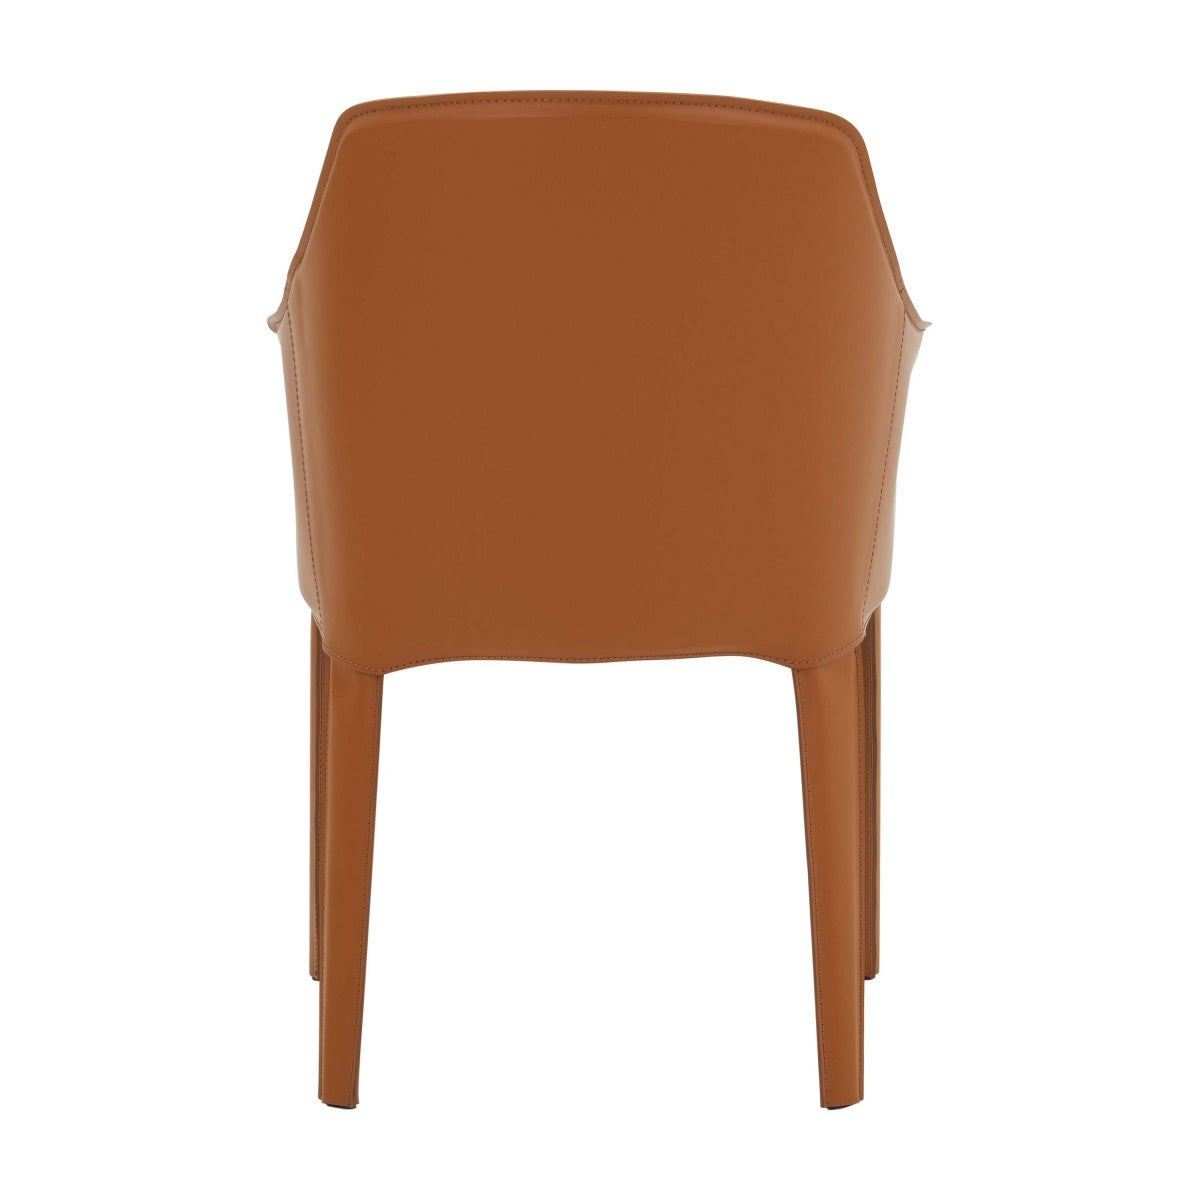 Berica Bespoke Upholstered Modern Contemporary Dining Armchair Chair MS024A Custom Made To Order